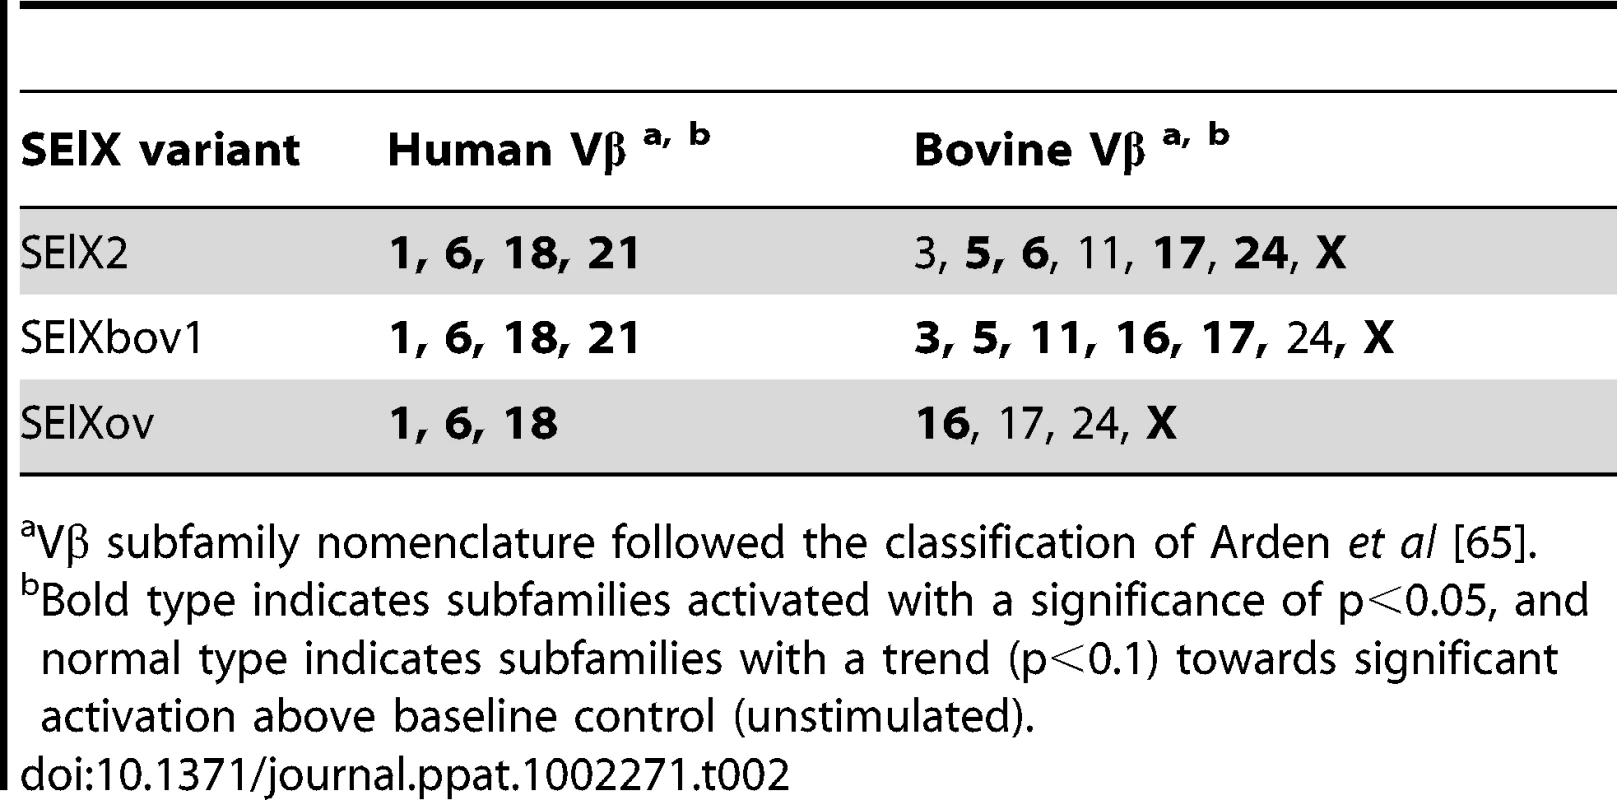 Human and bovine Vβ subfamilies activated in response to rSElX variants.